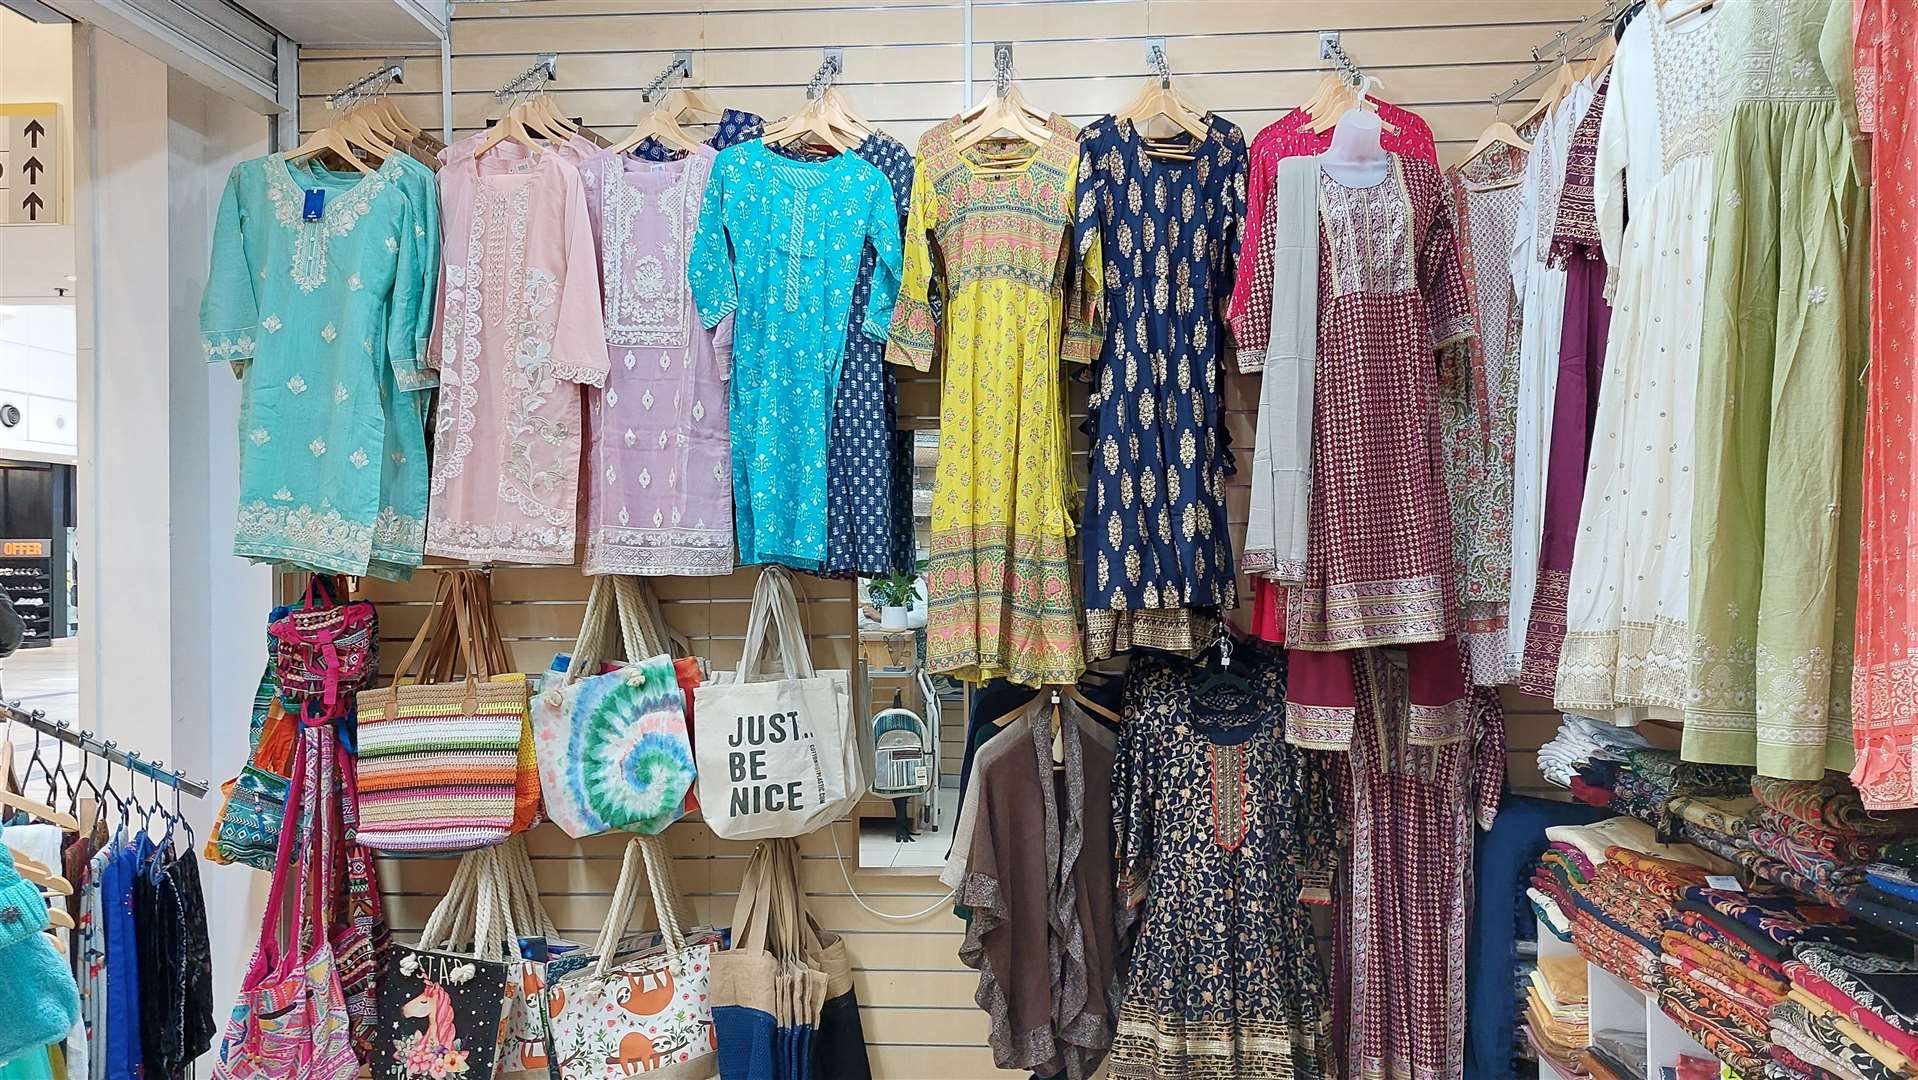 The shop sells dresses, scarves and jewellery